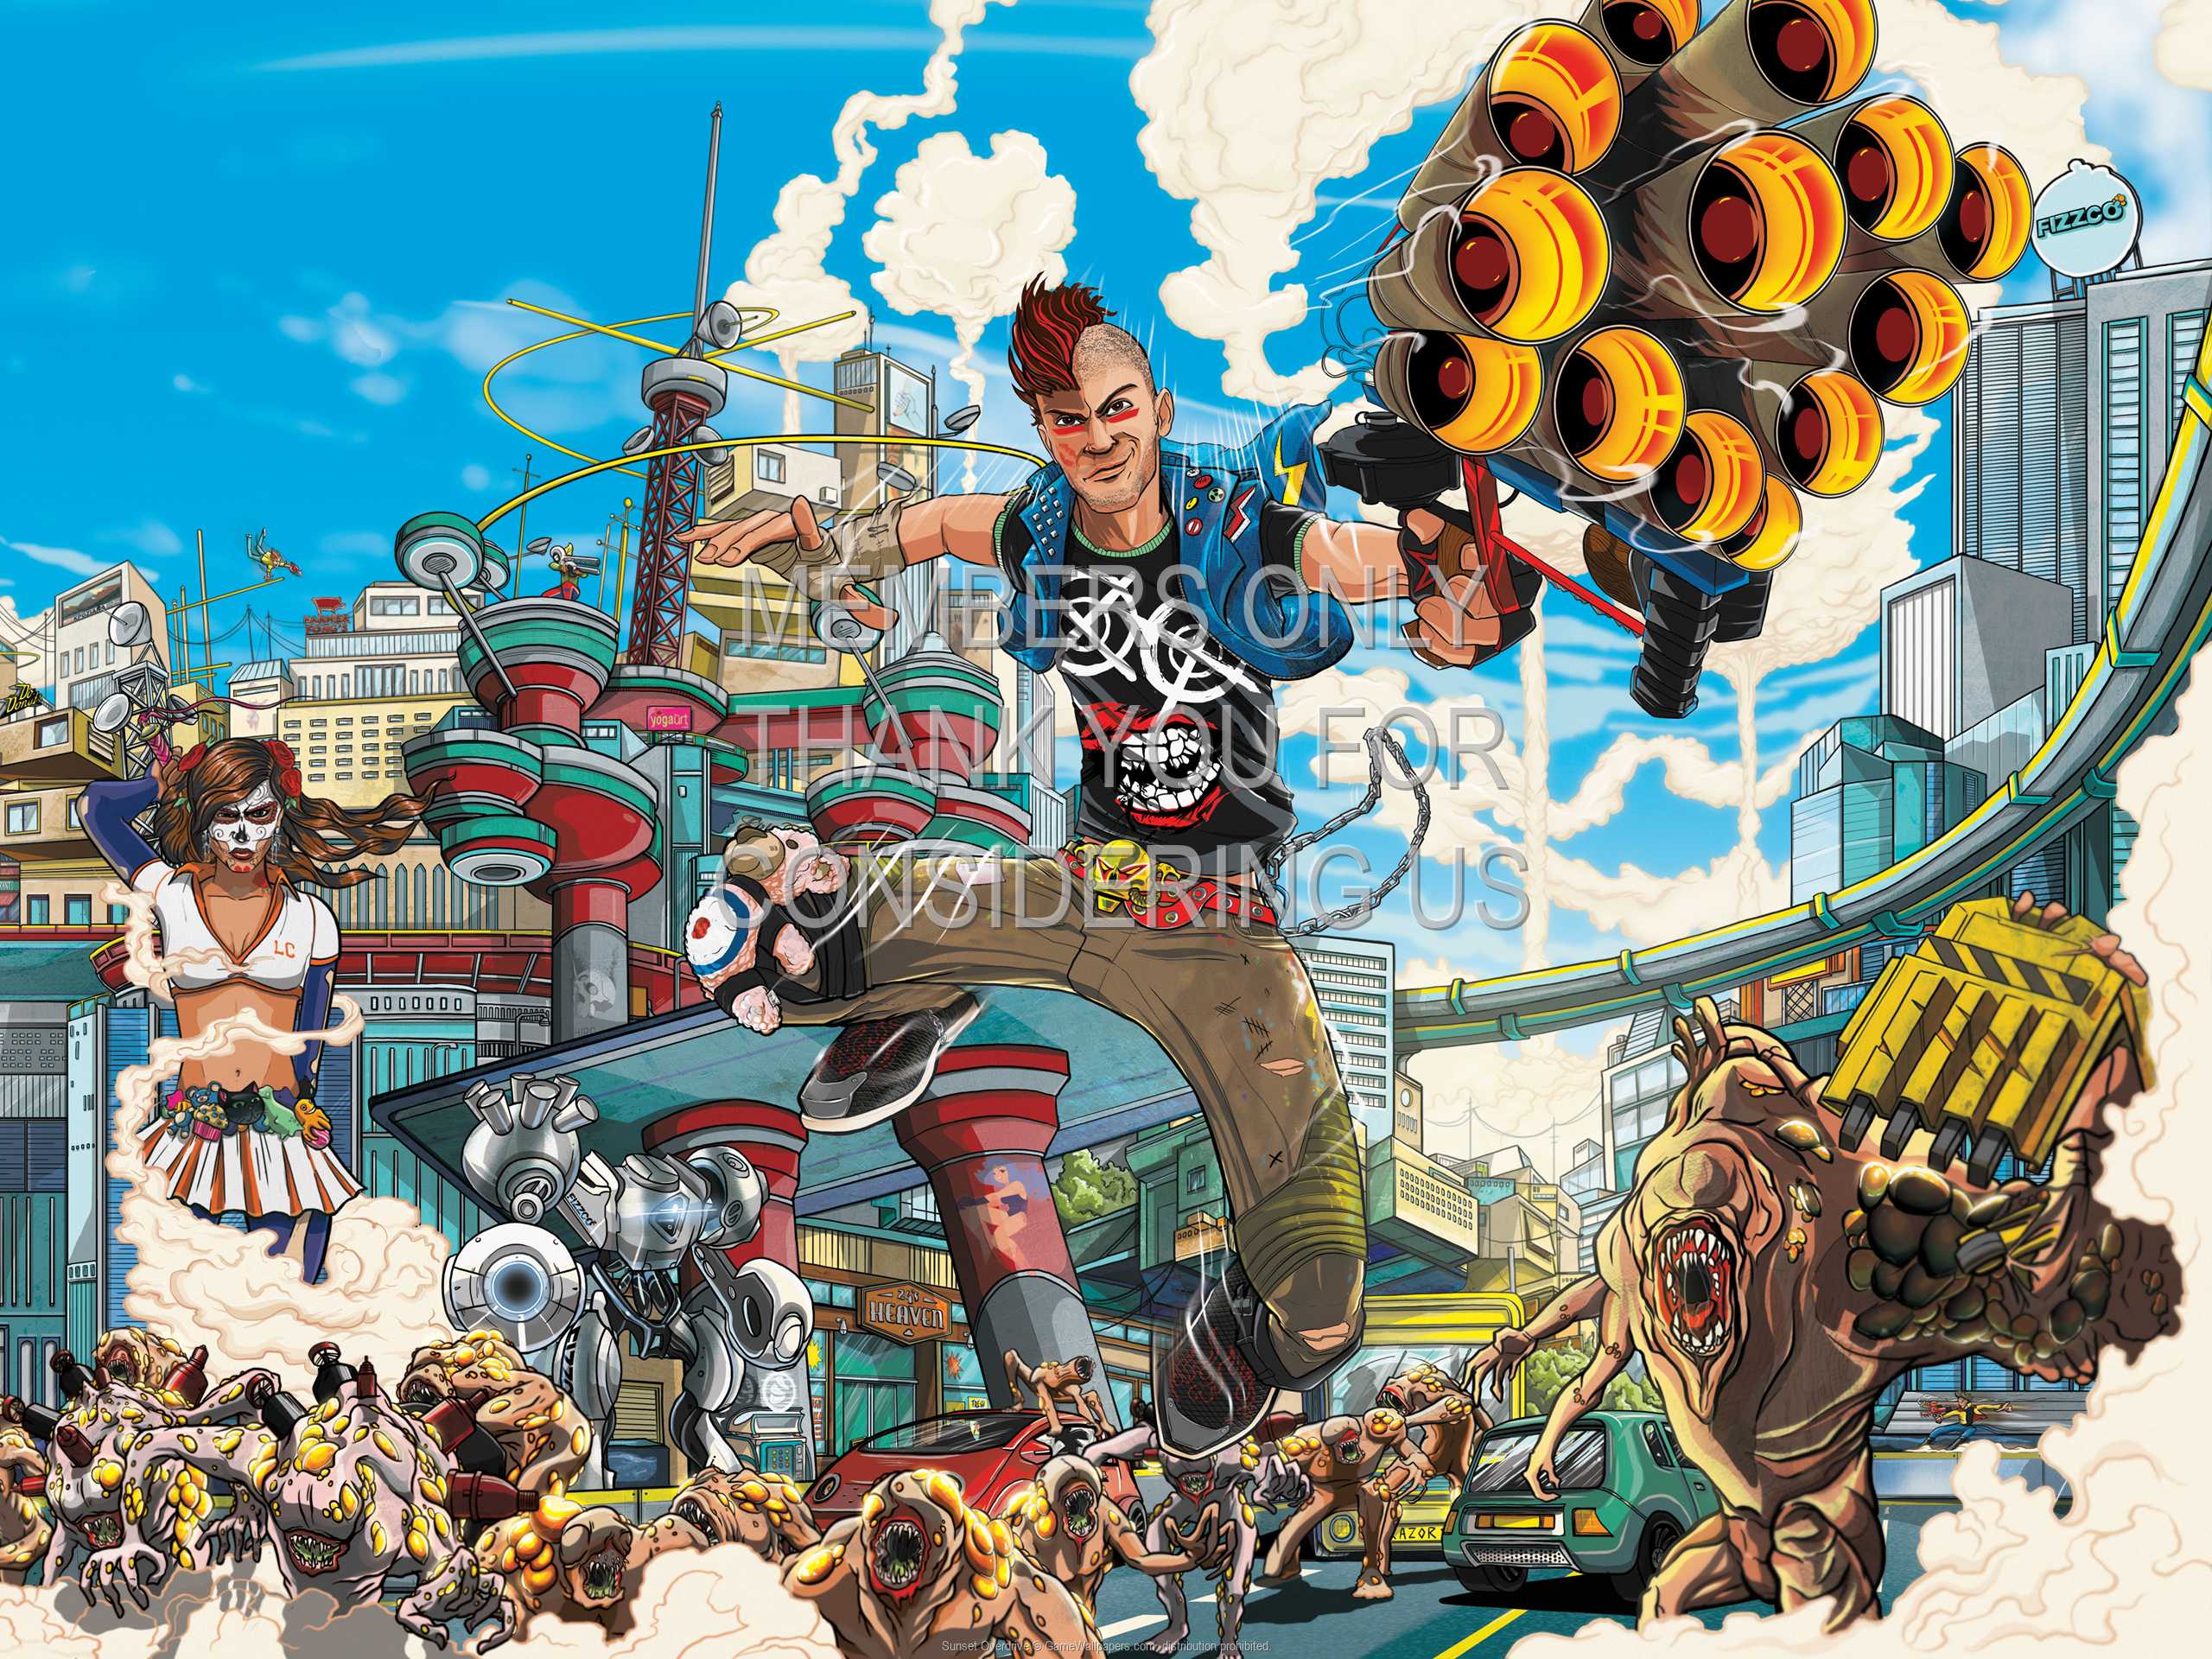 Sunset Overdrive 1080p Horizontal Mobile wallpaper or background 01